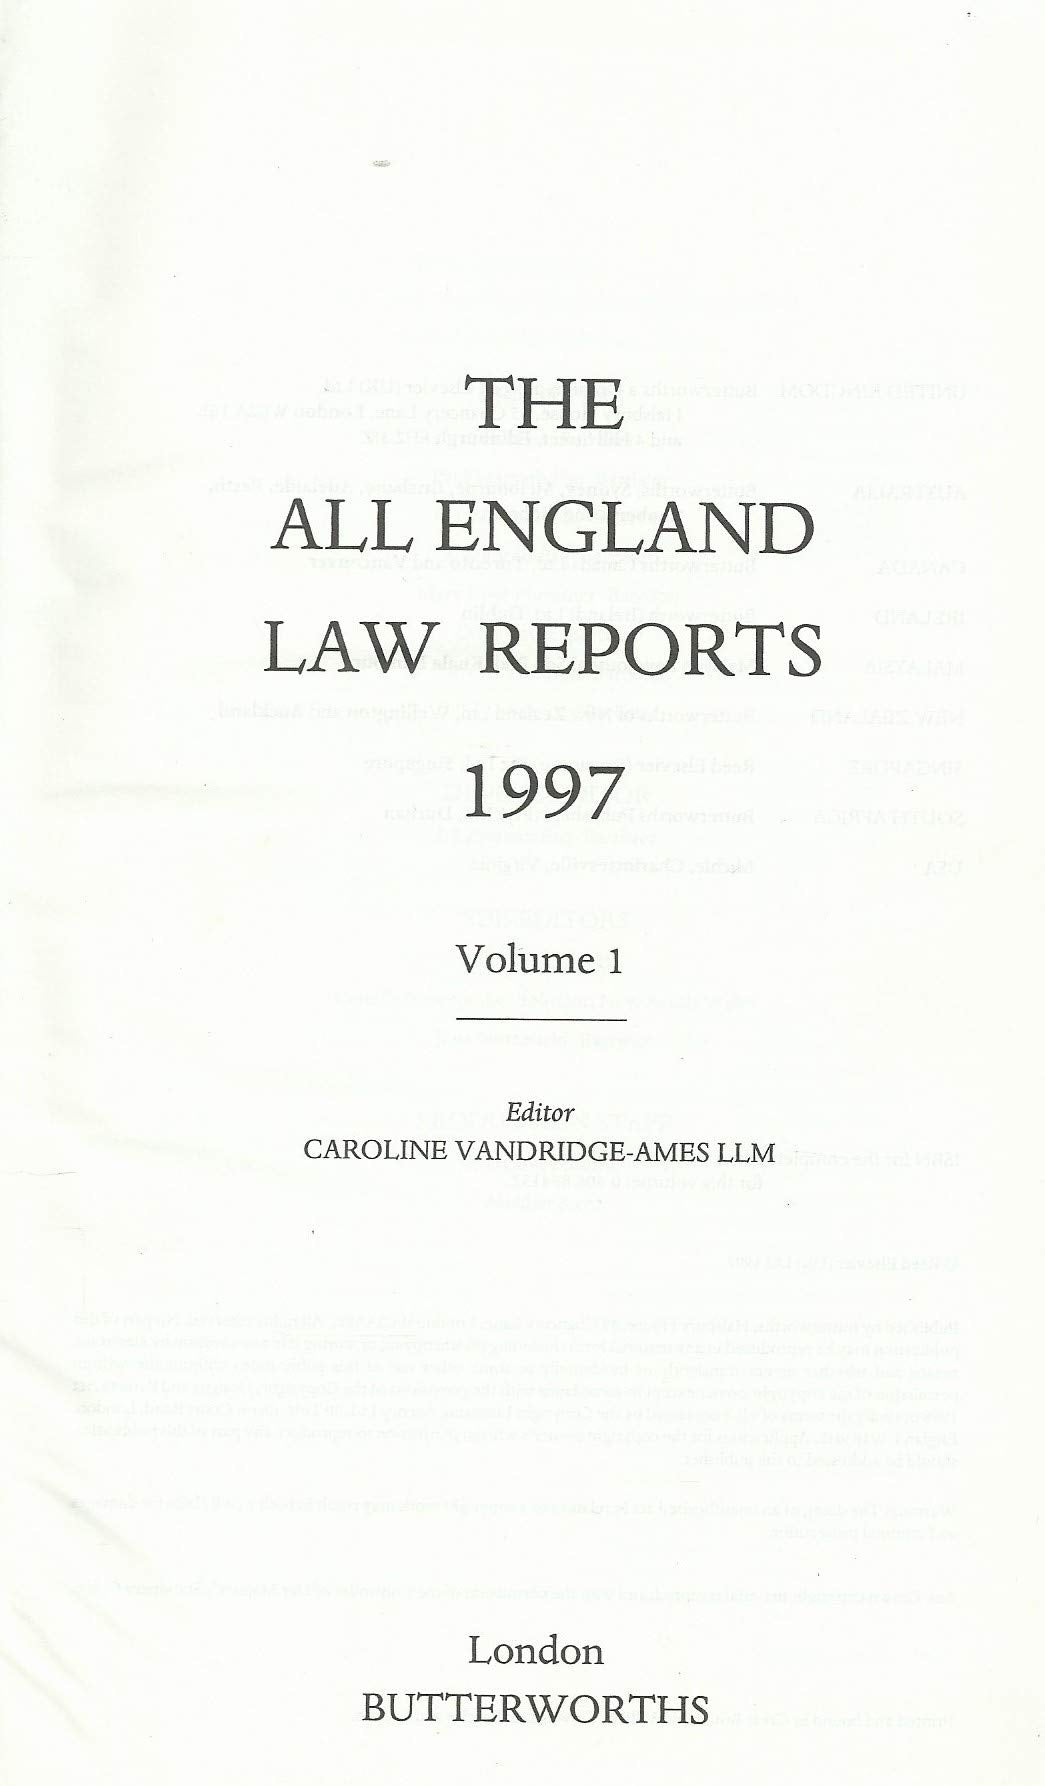 The All England Law Reports 1997 vol 1